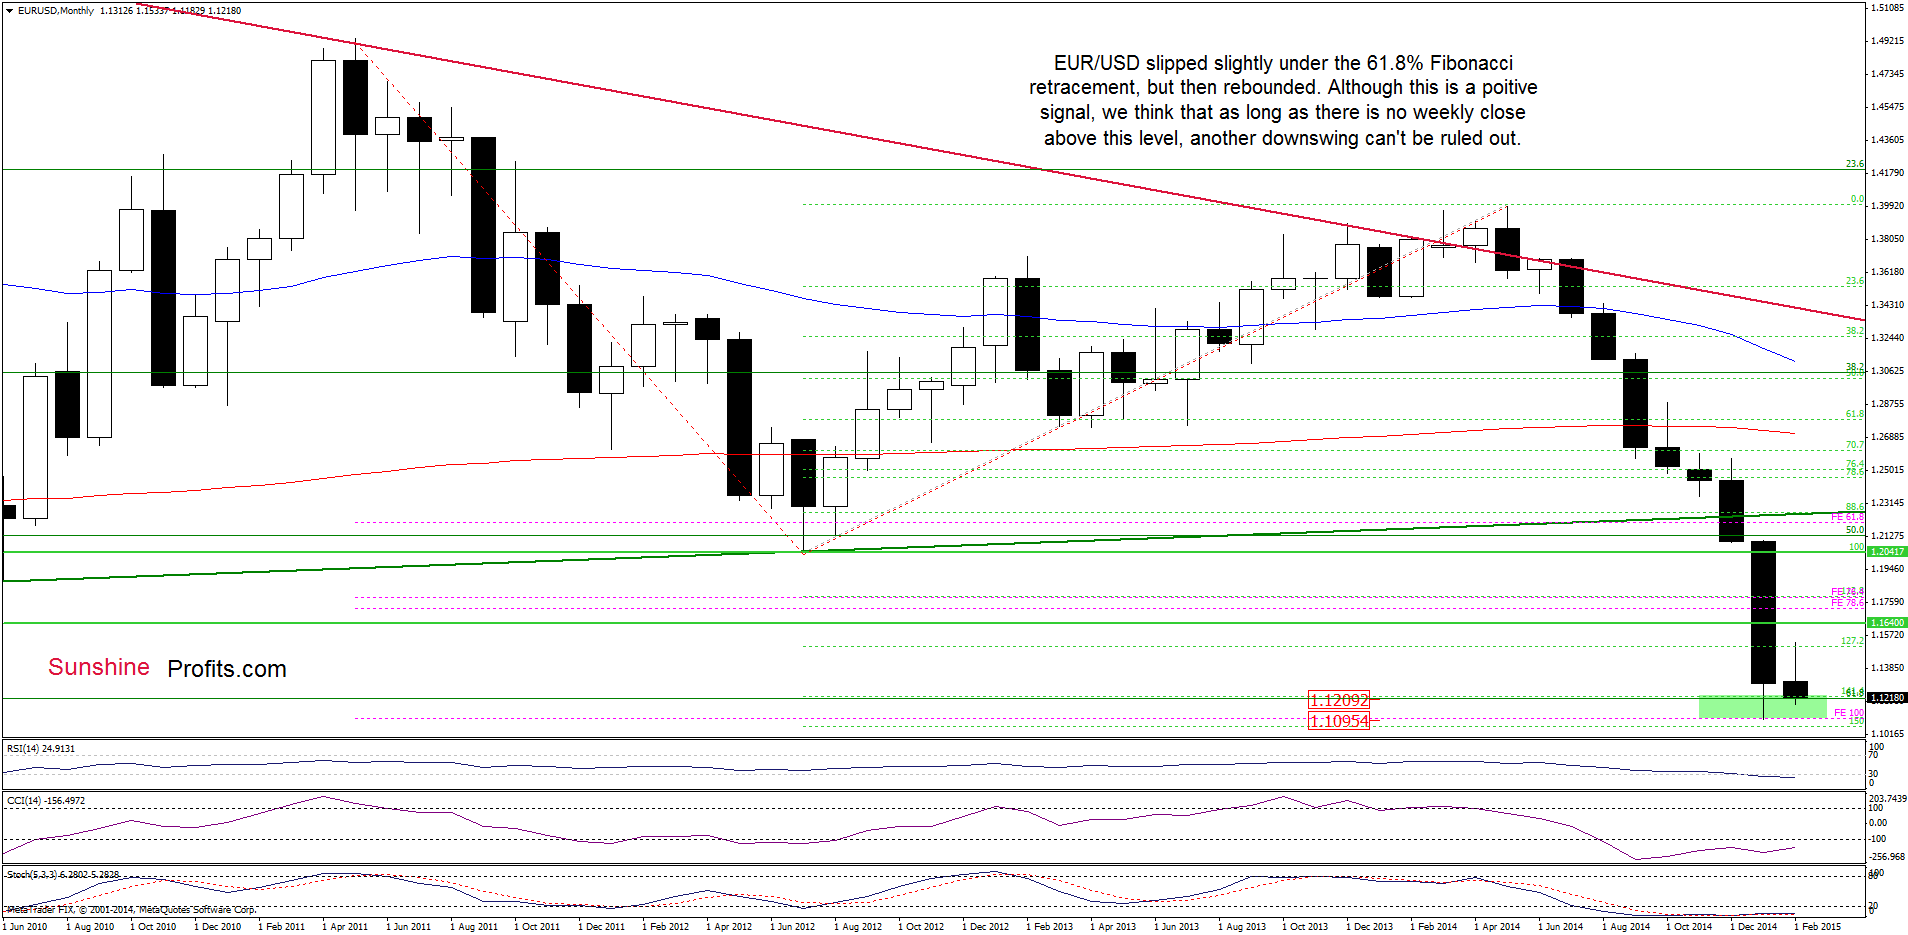 EUR/USD - the monthly chart